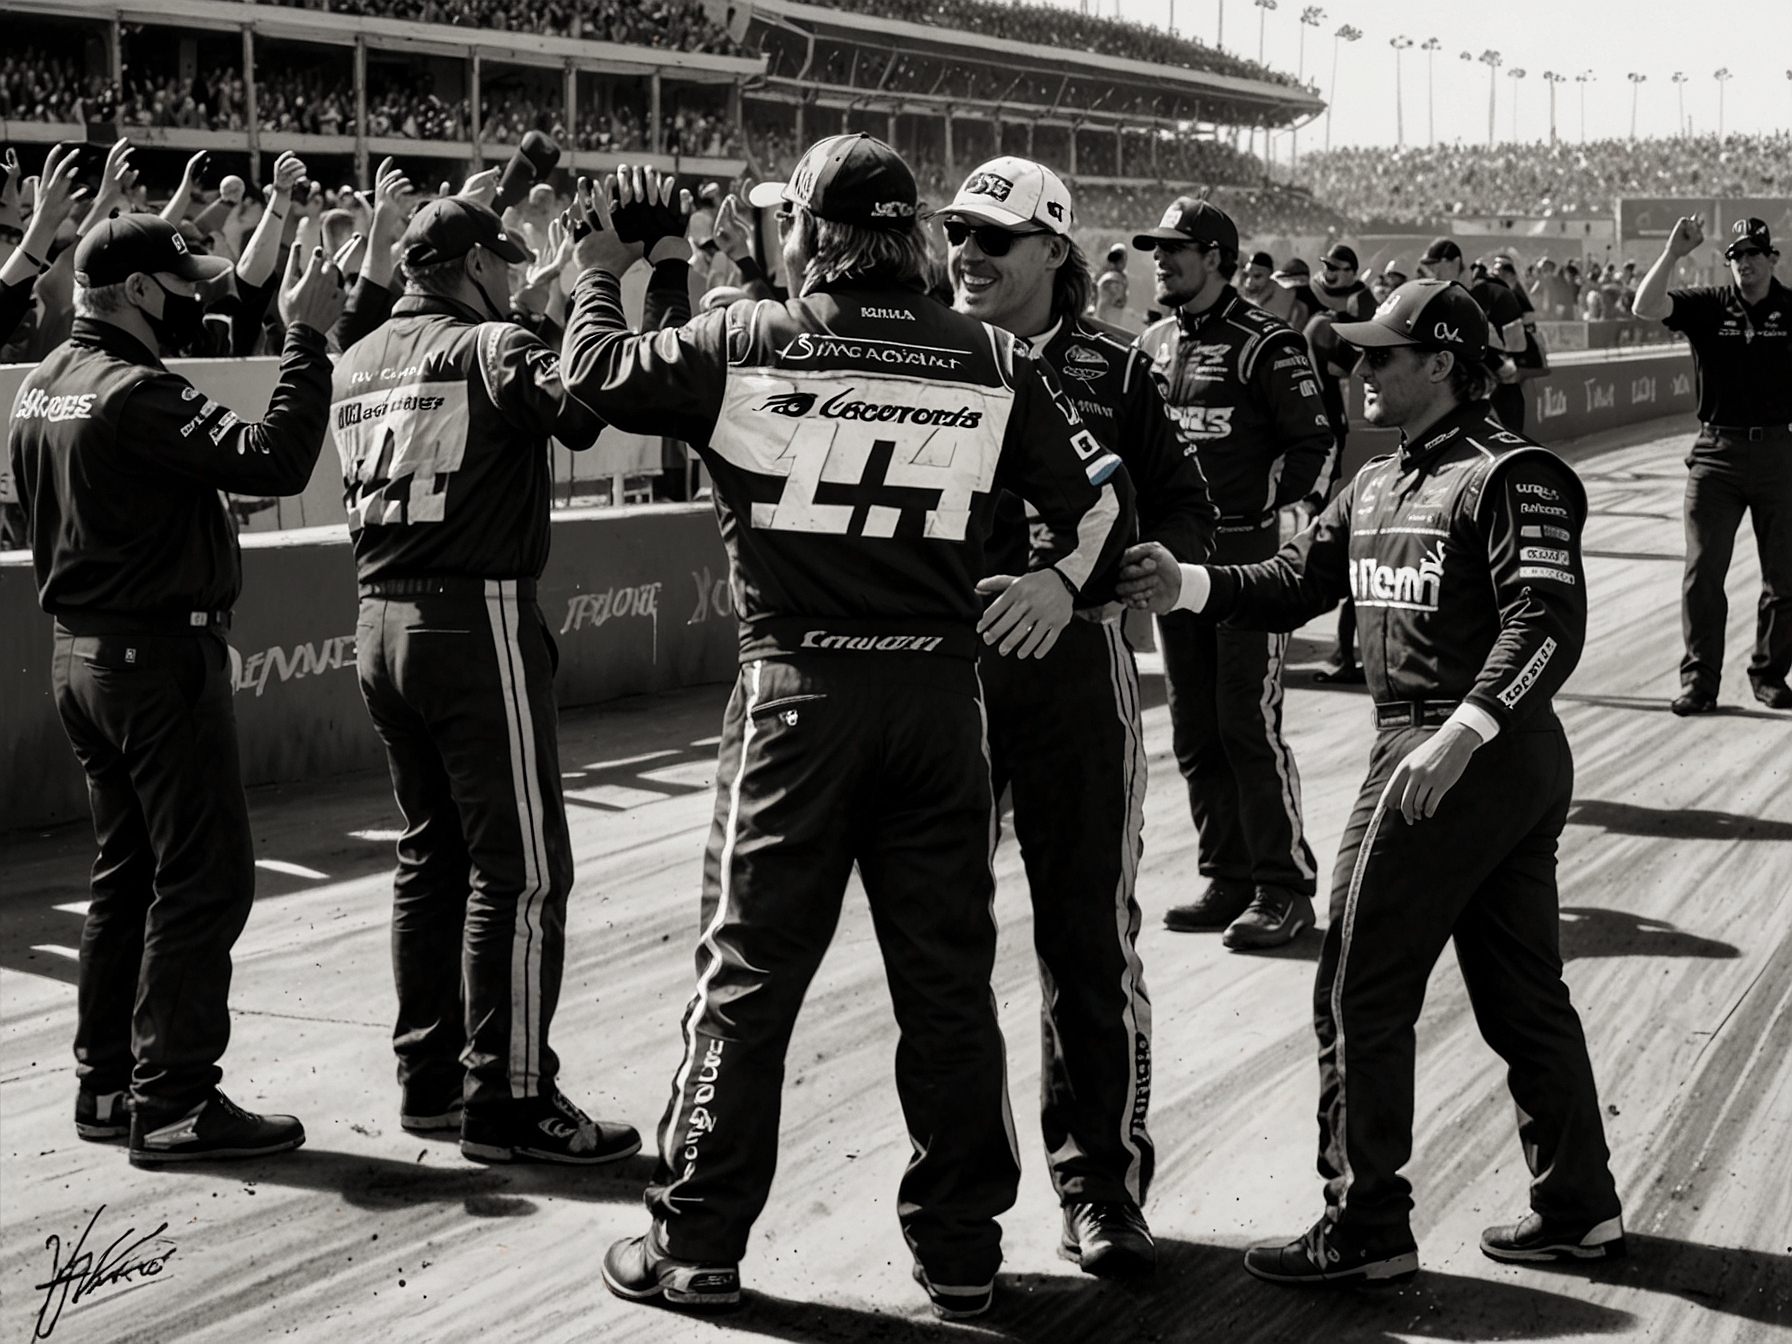 The No. 14 Stewart-Haas Racing team celebrating Briscoe's runner-up finish with high-fives and cheers in the pit area, showcasing their dedication and teamwork.